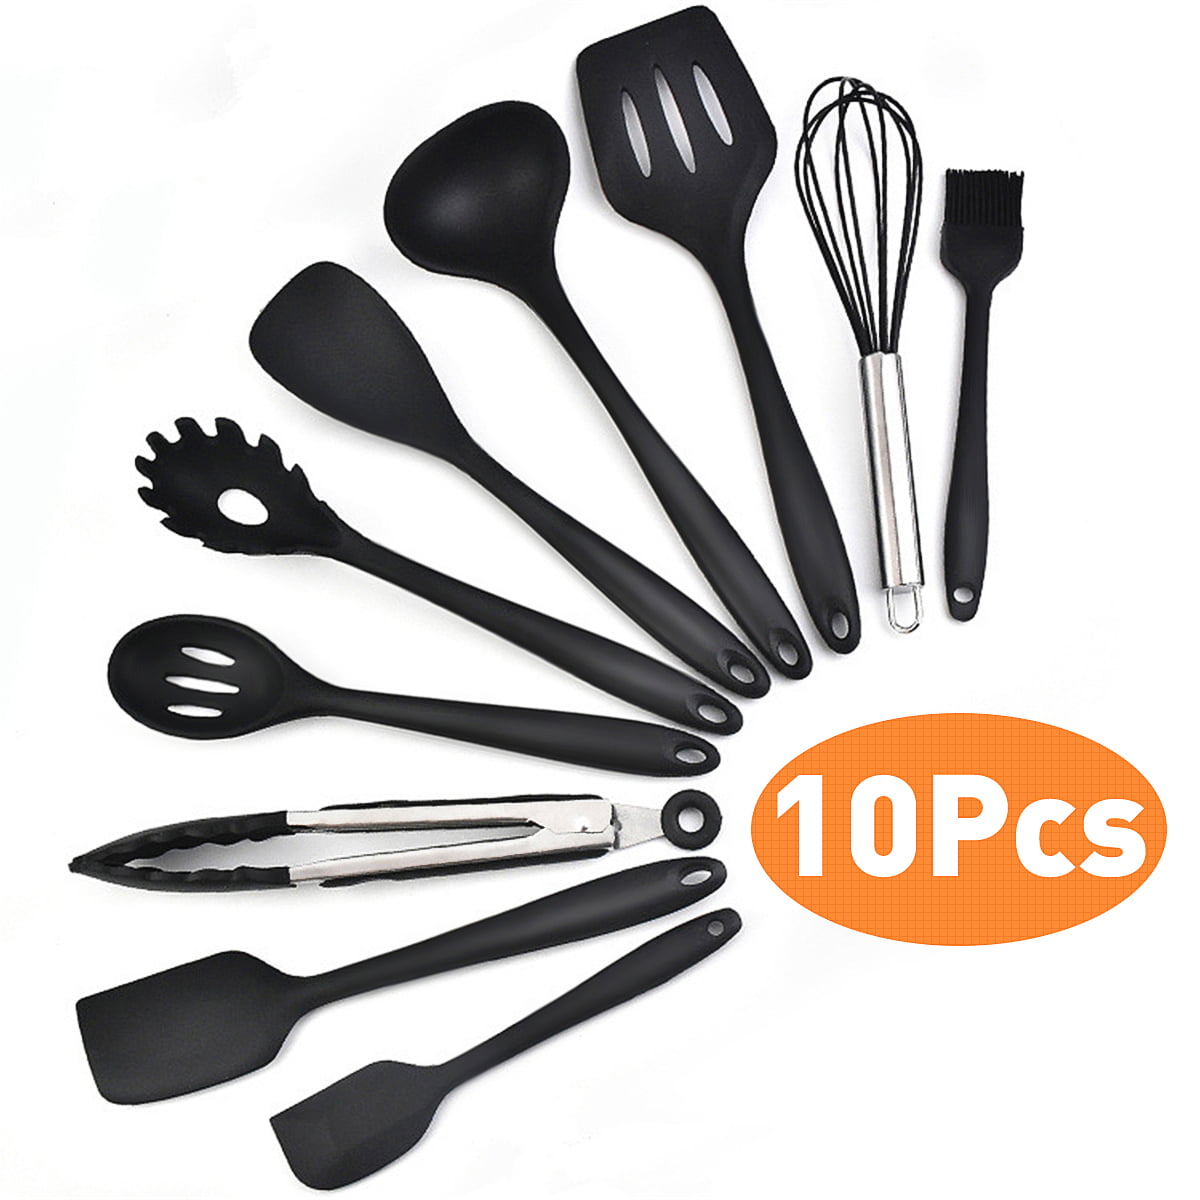 10PCS of ZT_YIMO Silicone Cooking Utensils Set Kitchen Utensile Grey/with Holder Premium Kitchen Gadget with Bamboo/Wooden Handle Cooking Tool Set for Nonstick Cookware